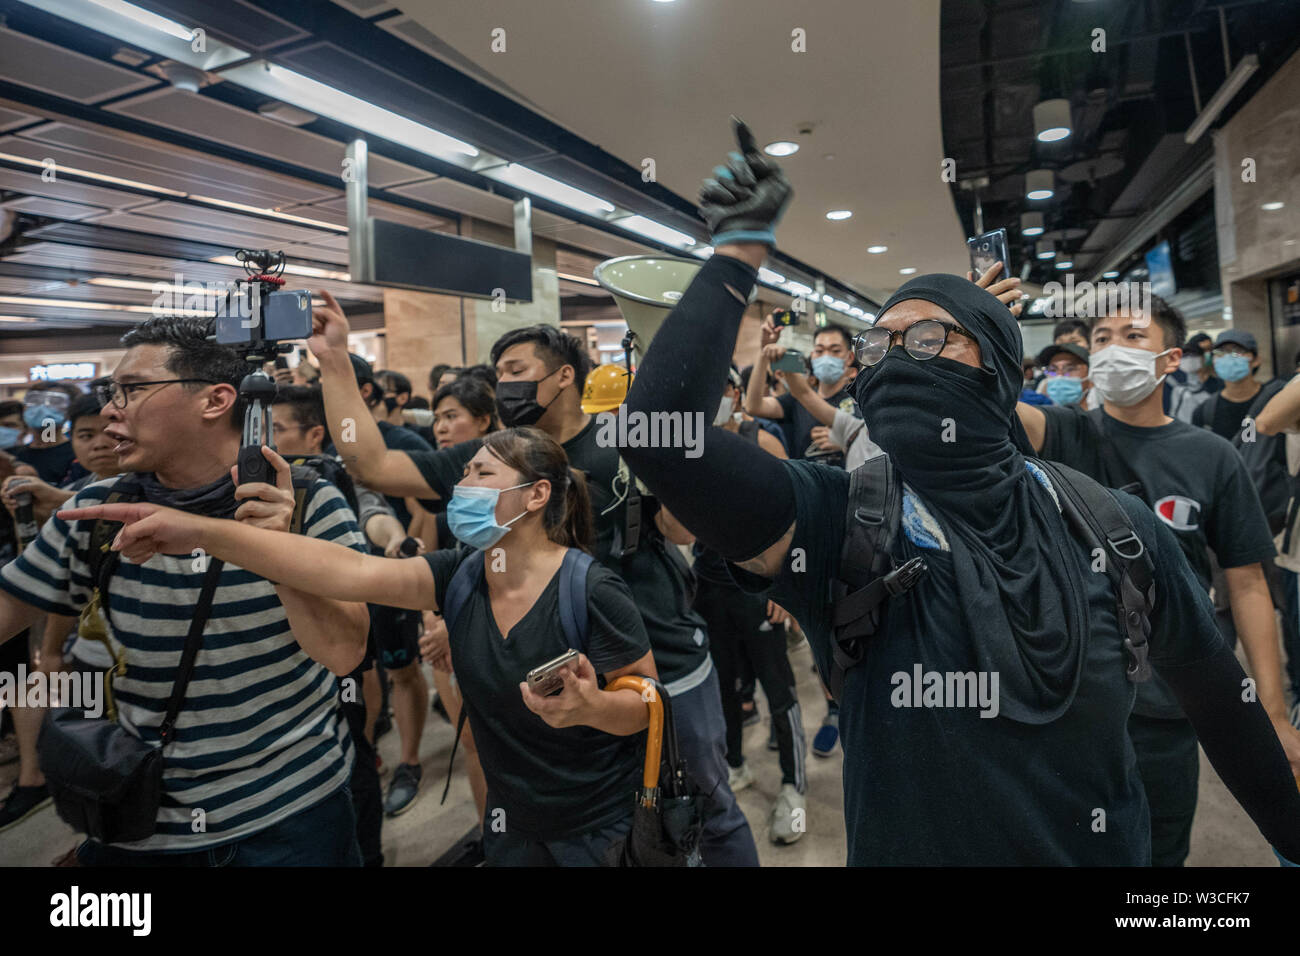 Demonstrators chanting slogans to the police as the police officers attempt to arrest protesters. Thousands of pro democracy demonstrators took to the street once again in a new wave of anti government demonstrations which sparked by the extradition bill that the Hong Kong government was trying to push forward in June 2019.Police has made at least 30 arrests as protesters clashed with the riot police in the evening. Stock Photo